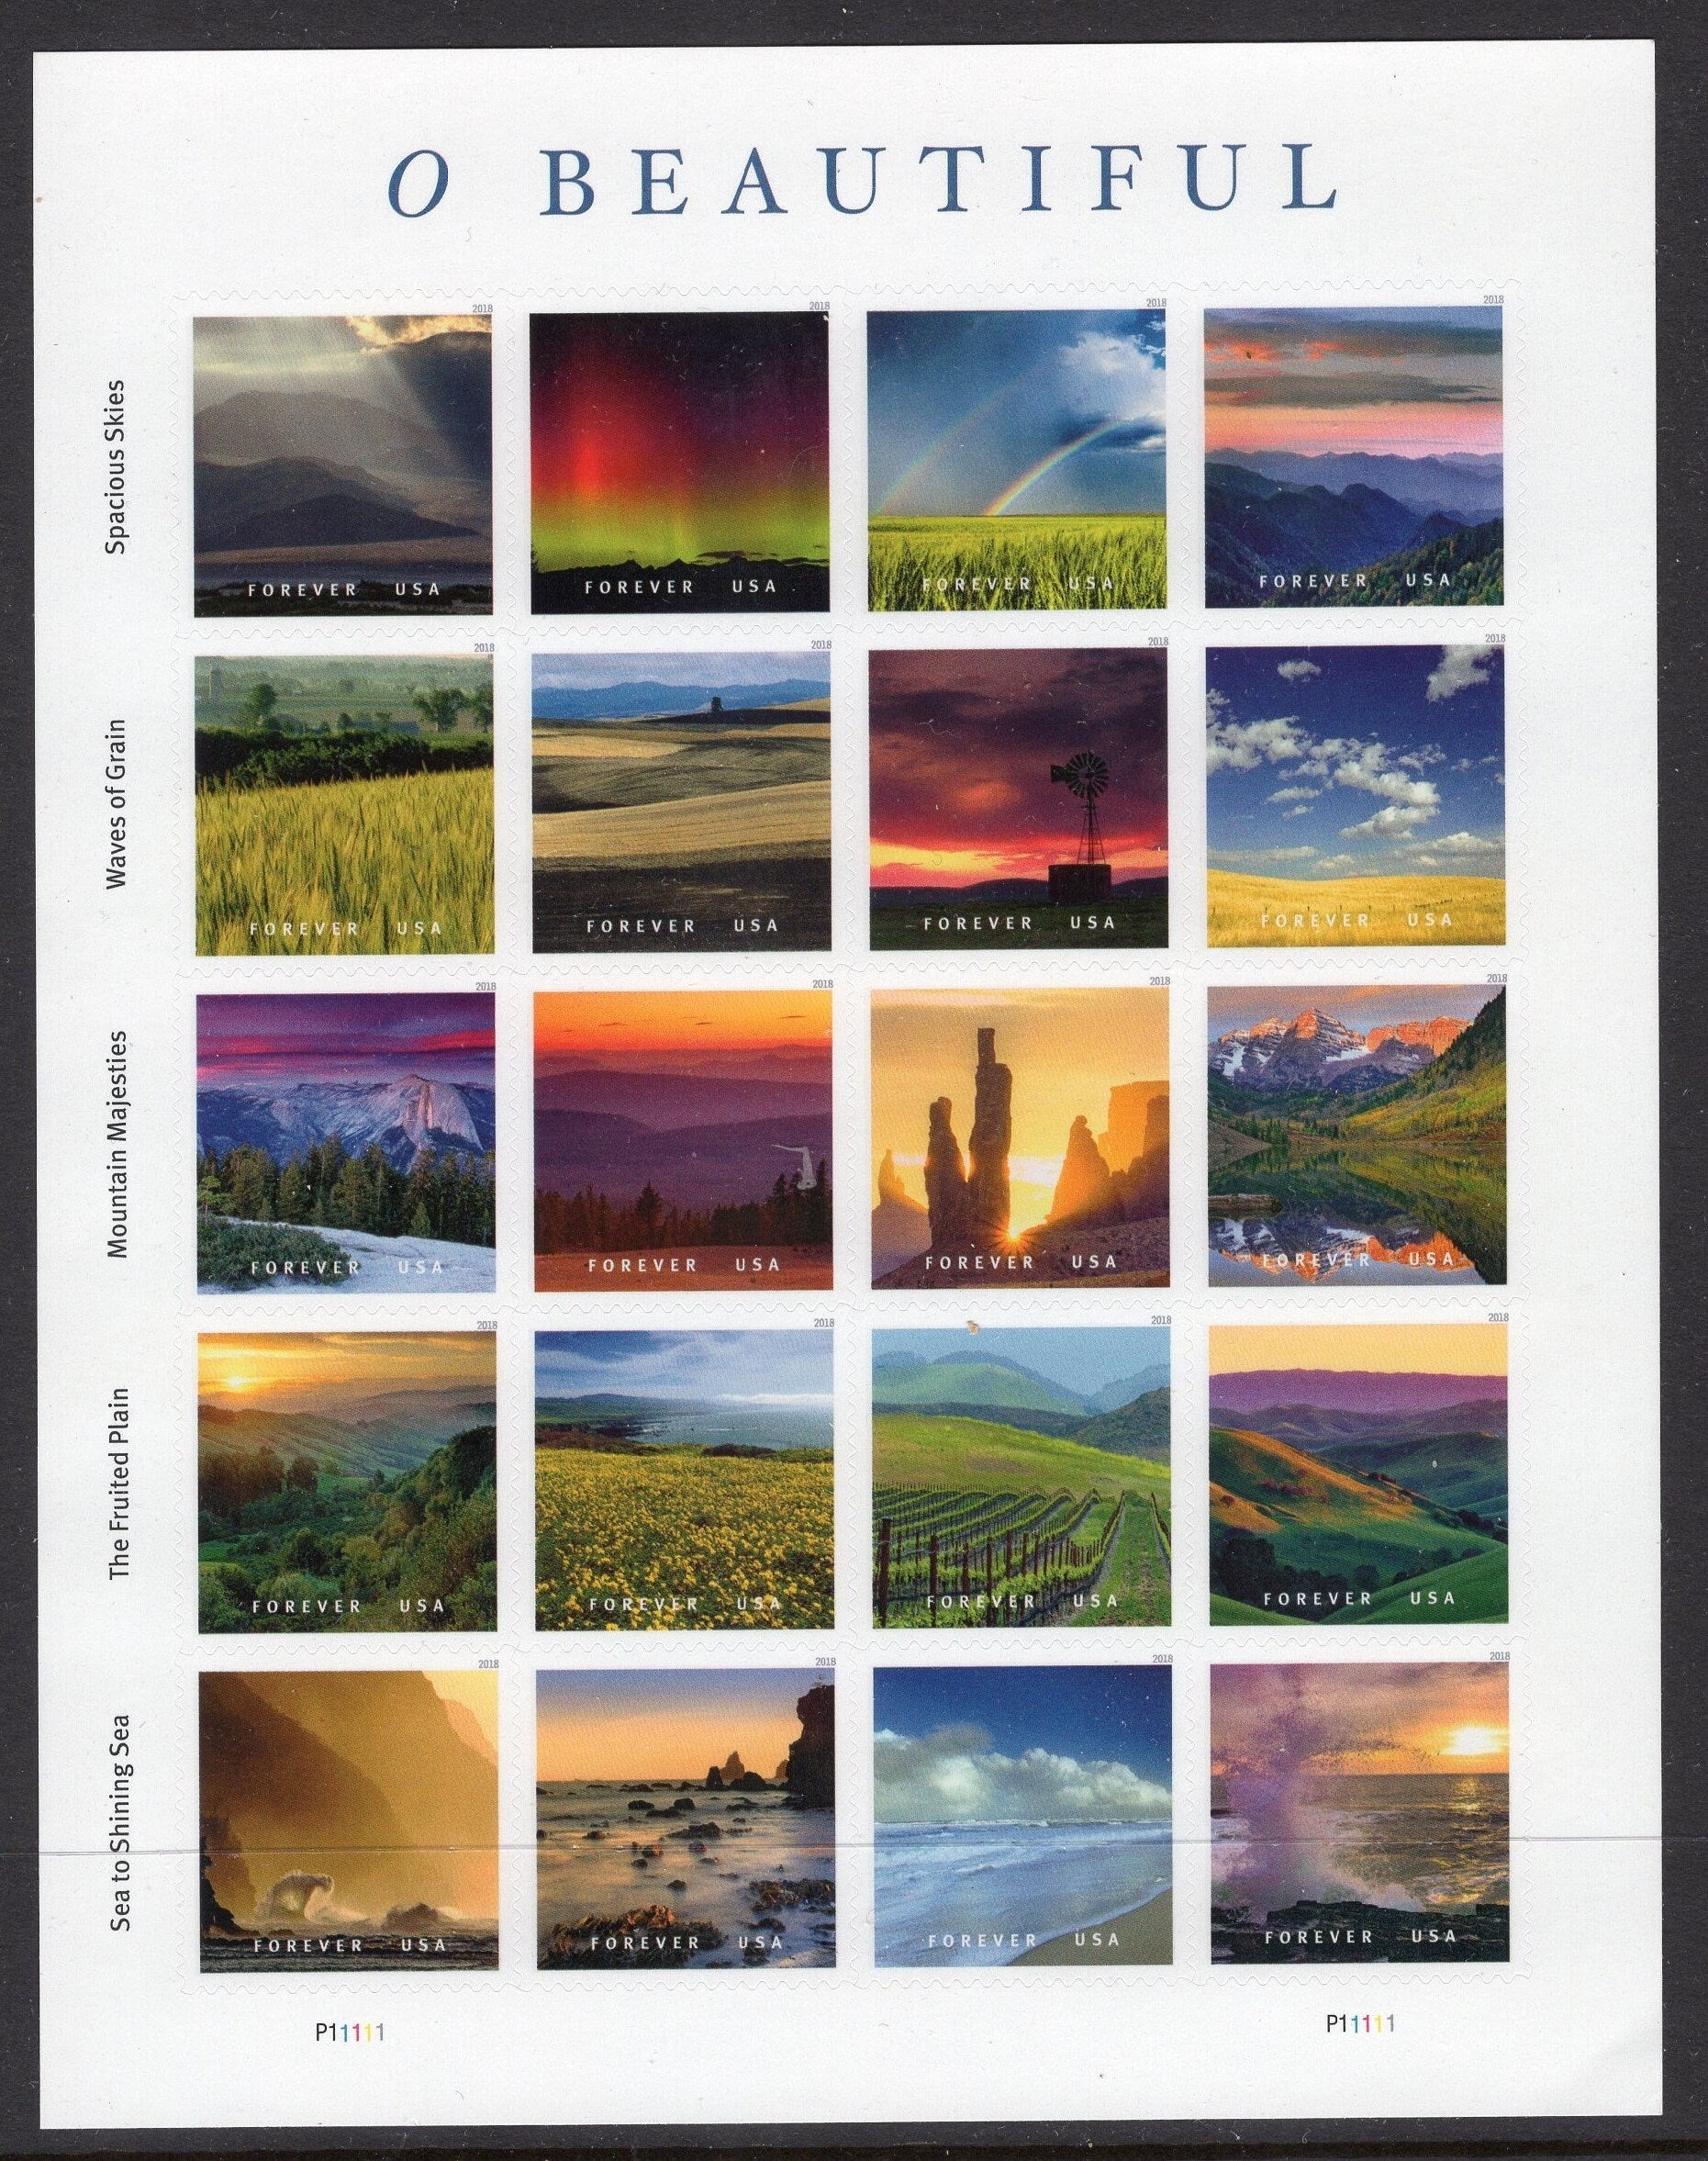 20 O'BEAUTIFUL AMERICA Scenic Nature FOREVER Stamps in 1 Sheet Bright USA Postage Stamps - Issued in 2018 - s5298 -